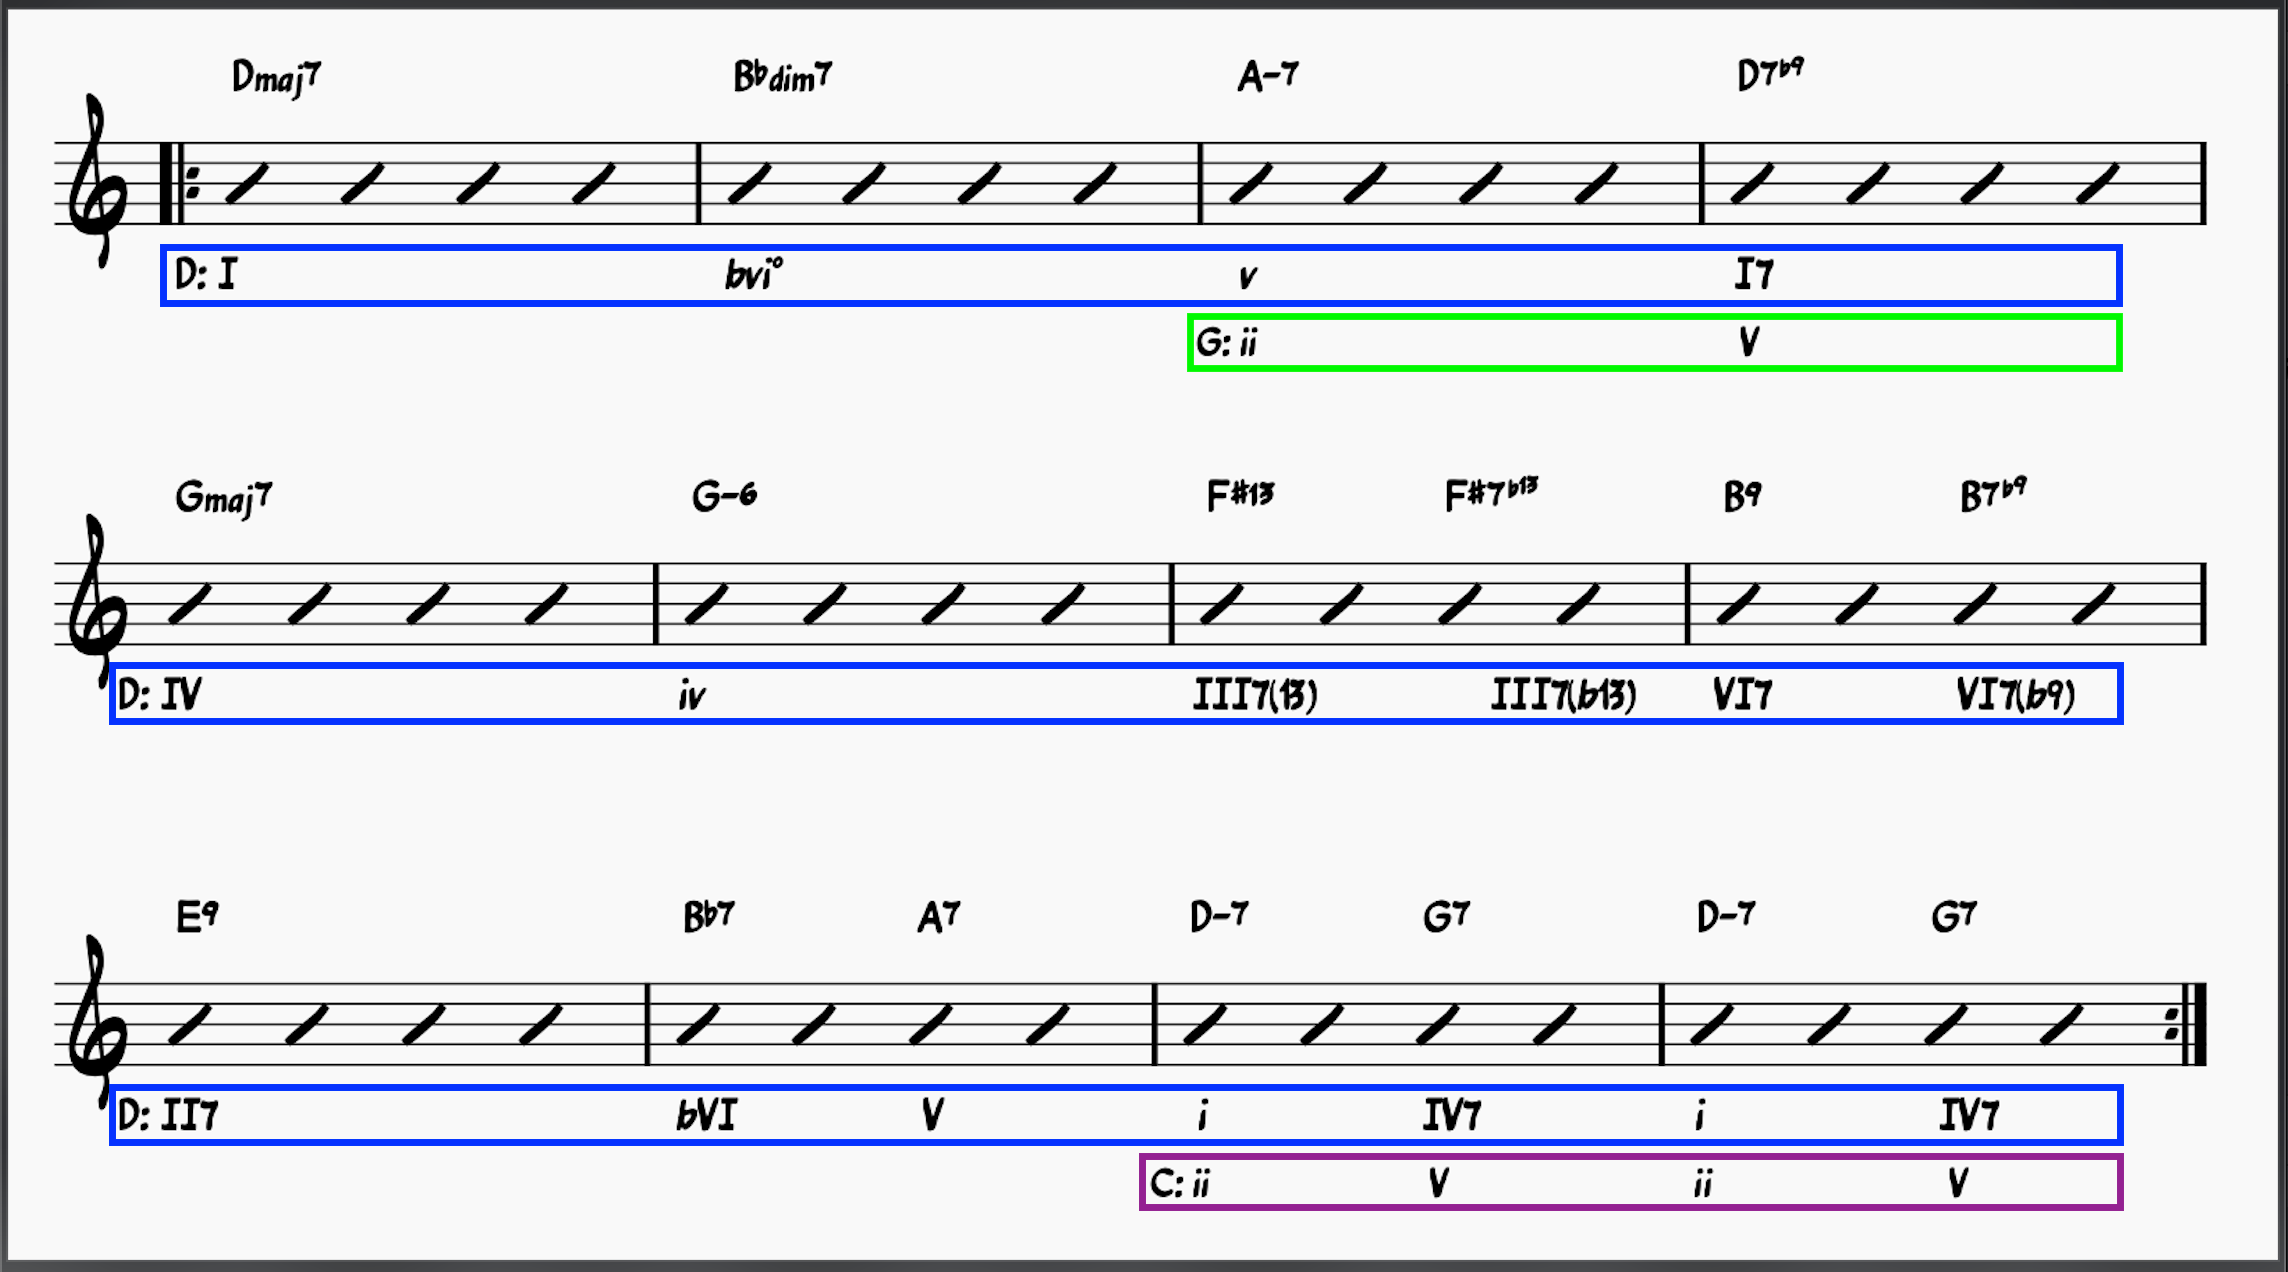 Bossa Nova Chord Progressions: The A Section of the jazz standard Wave